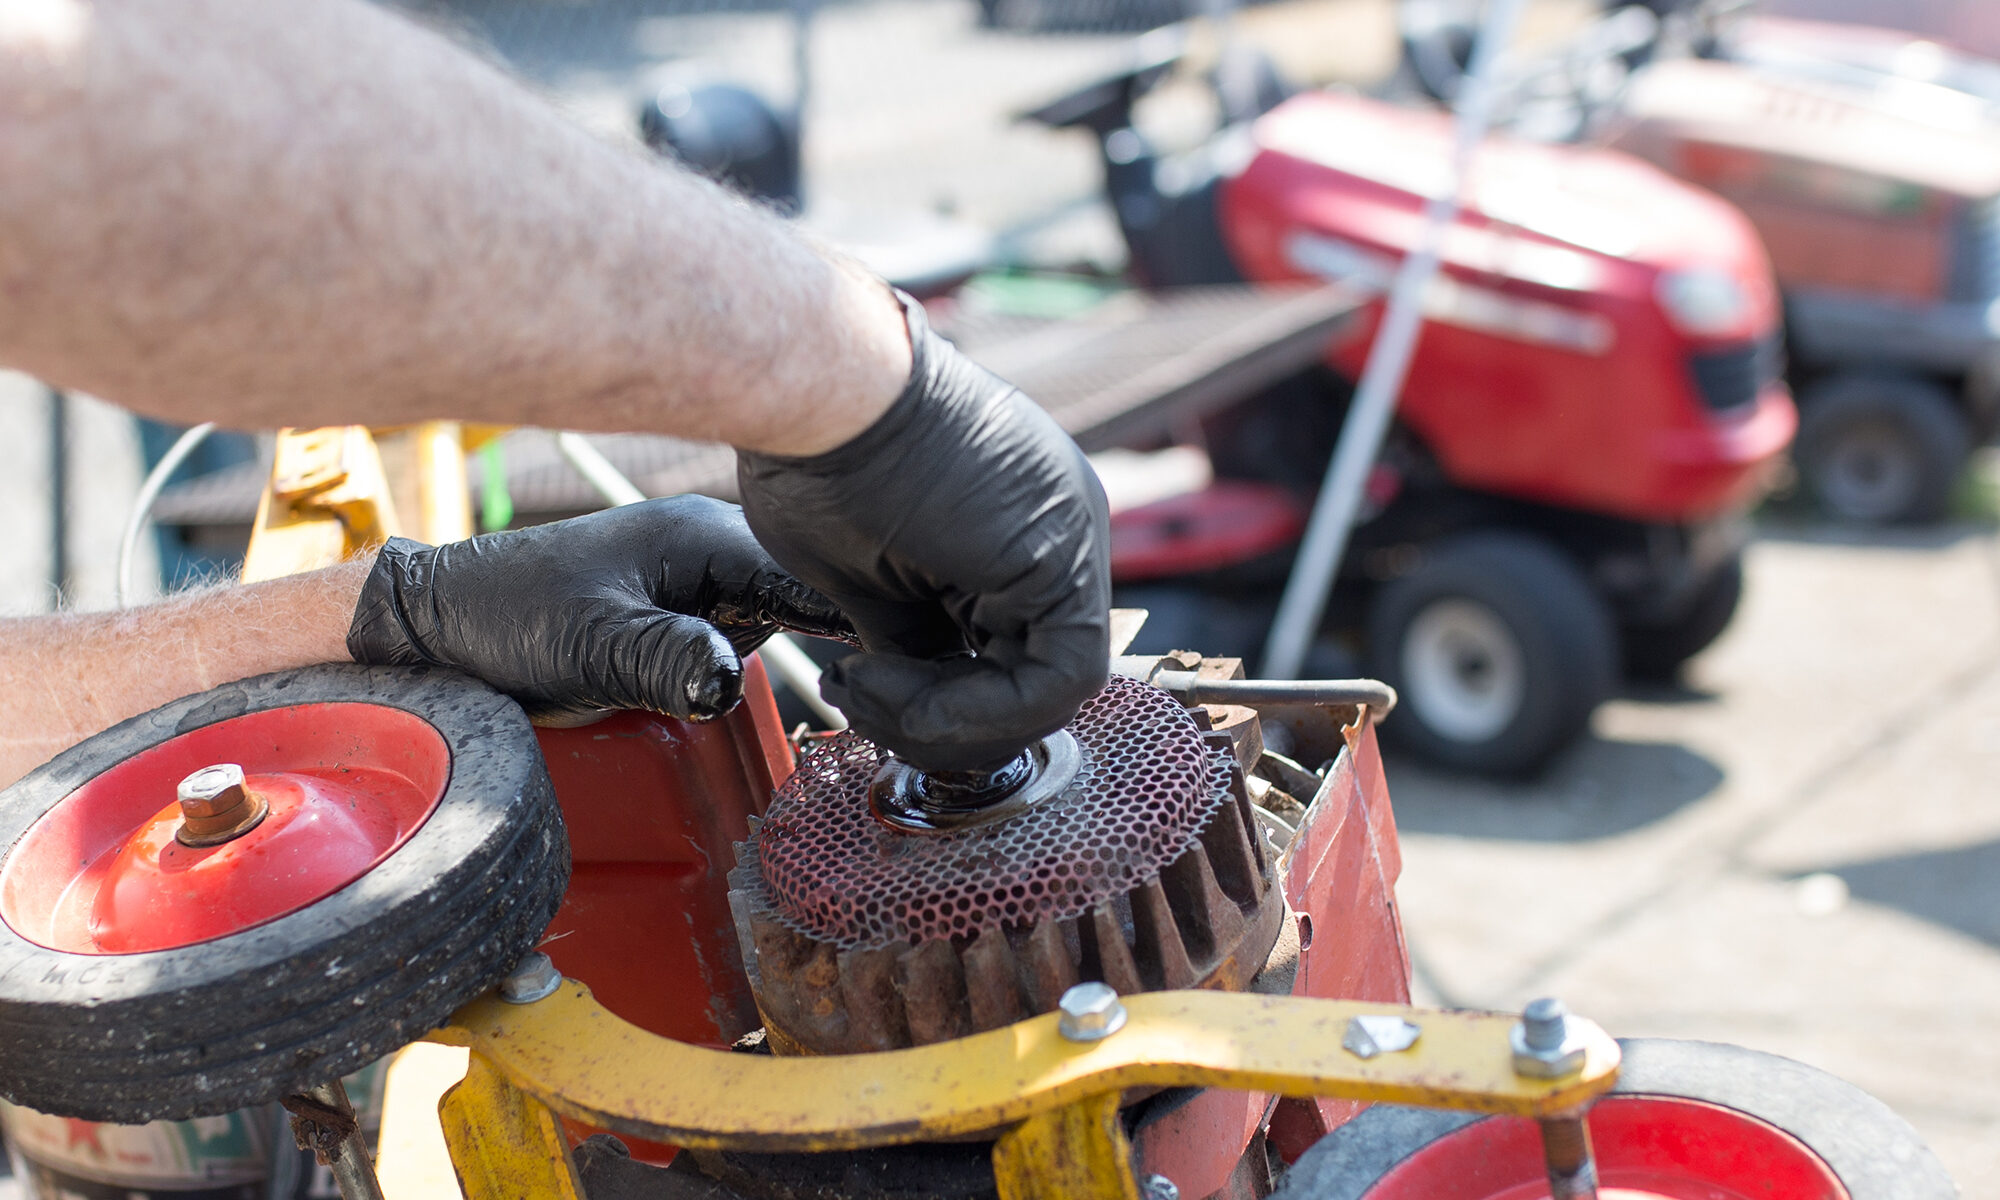 A man works on a lawnmower while wearing X3 Industrial Black Nitrile Gloves (BX3) from AMMEX.